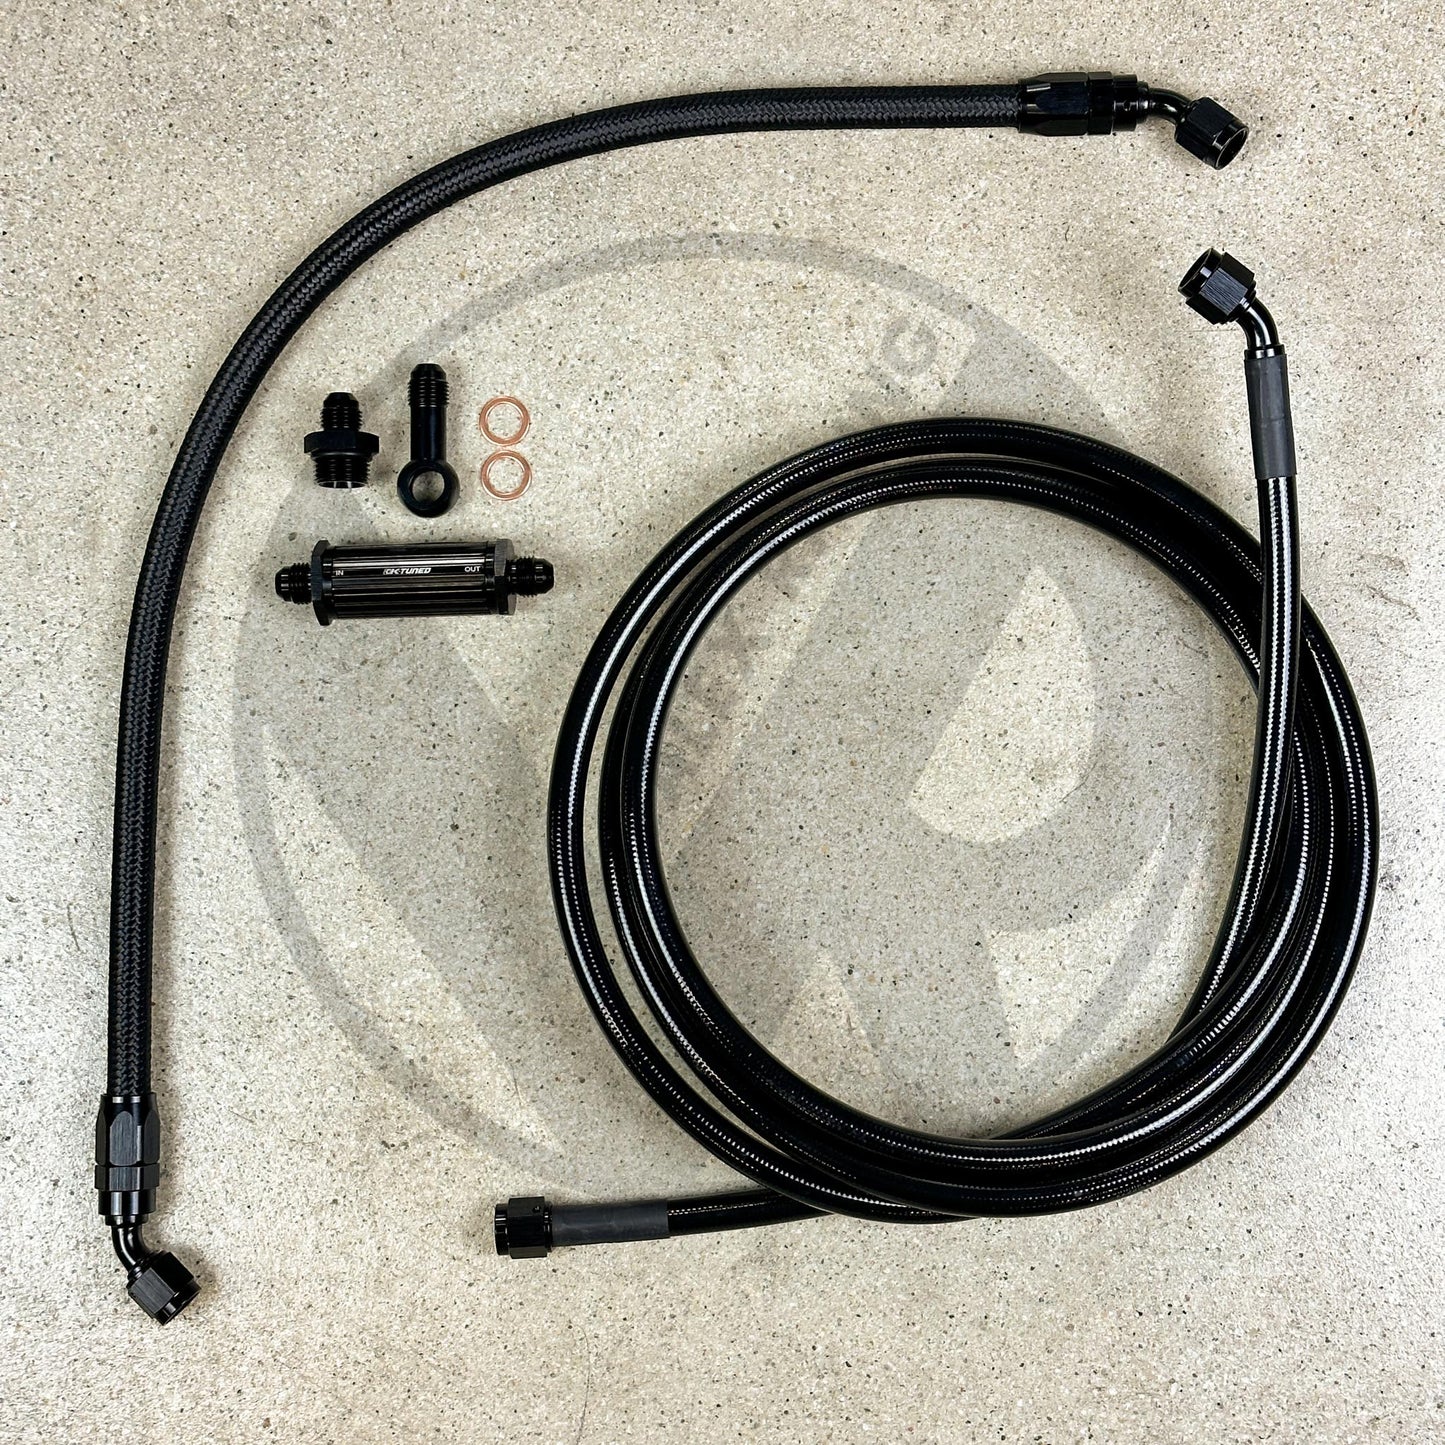 94-95 Integra DC2 K Swap Tucked Stainless Steel Fuel Feed Line System K-Tuned Filter -6 Black